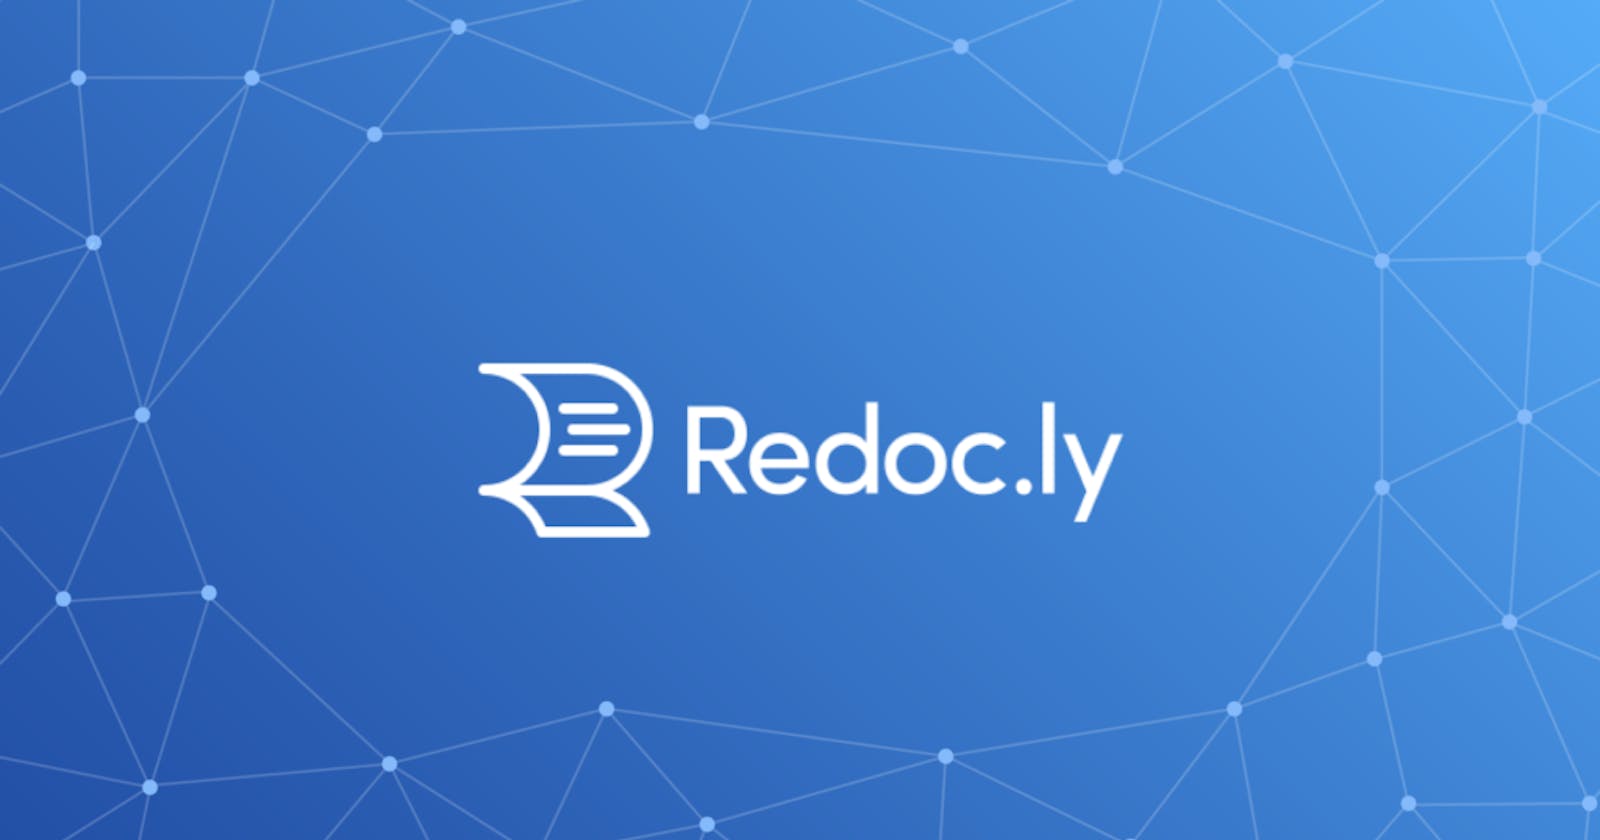 Next.js + Redoc to create a low-latency API references